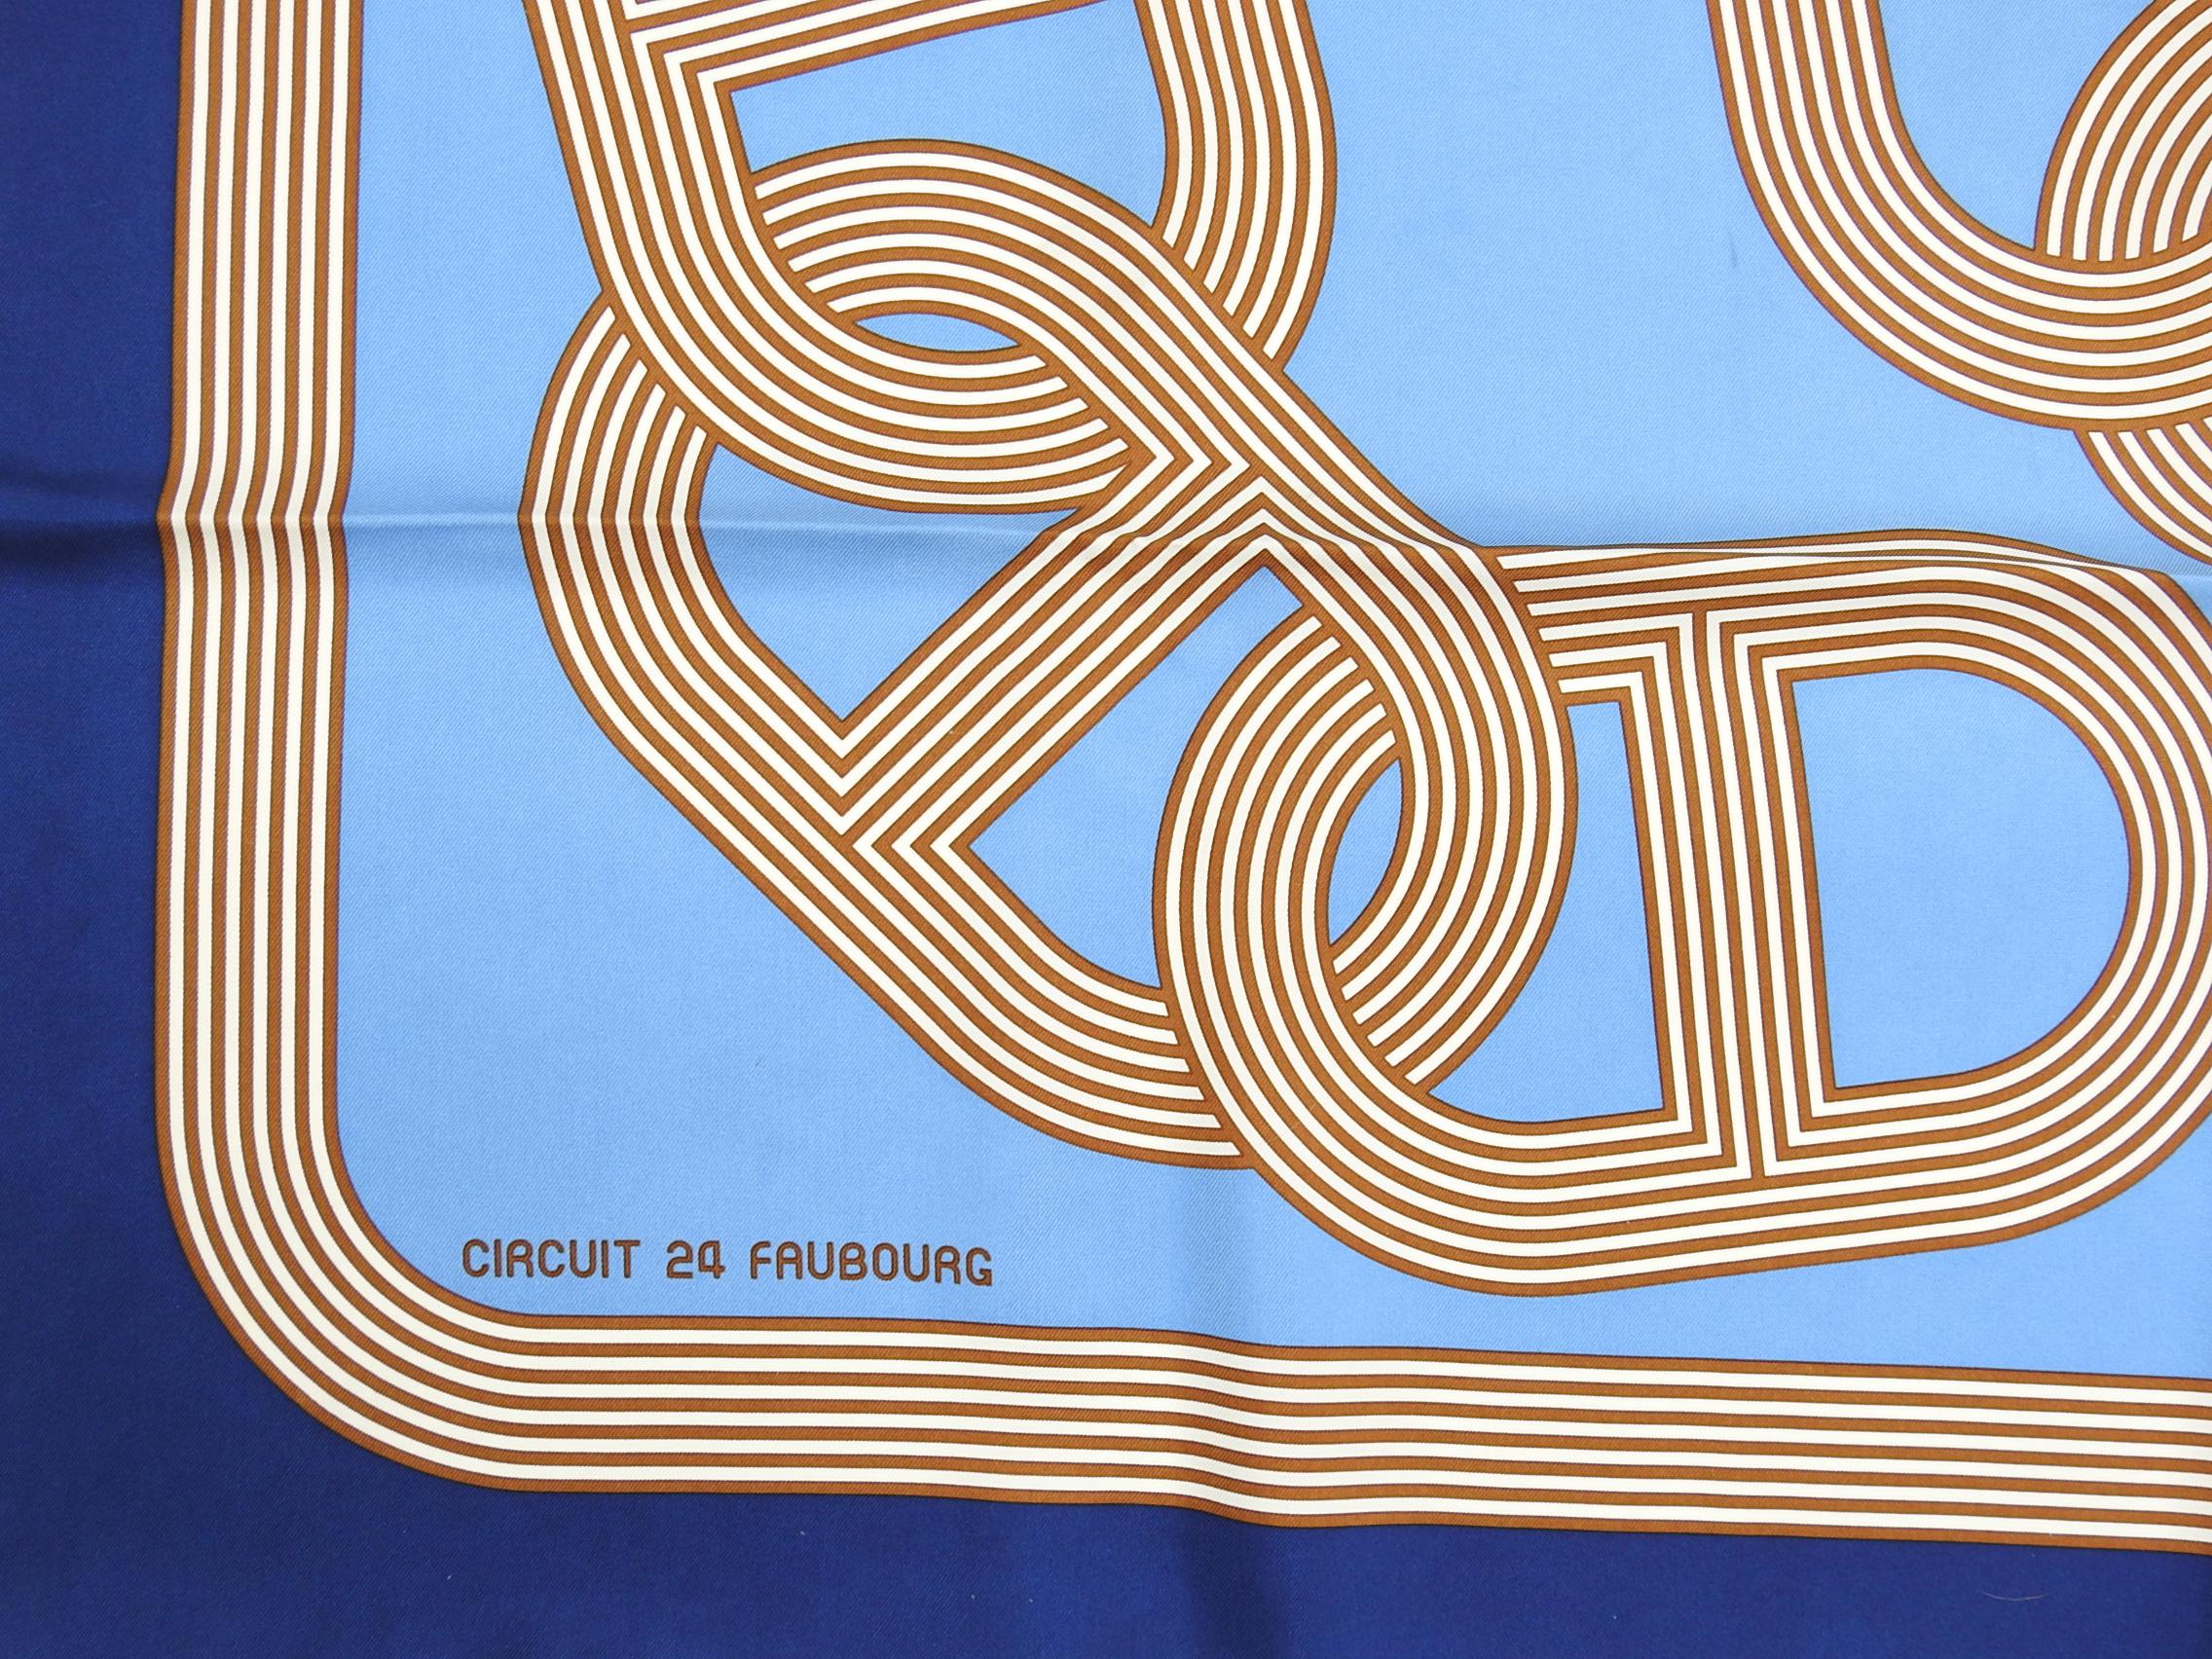 hermes circuit 24 faubourg scarf